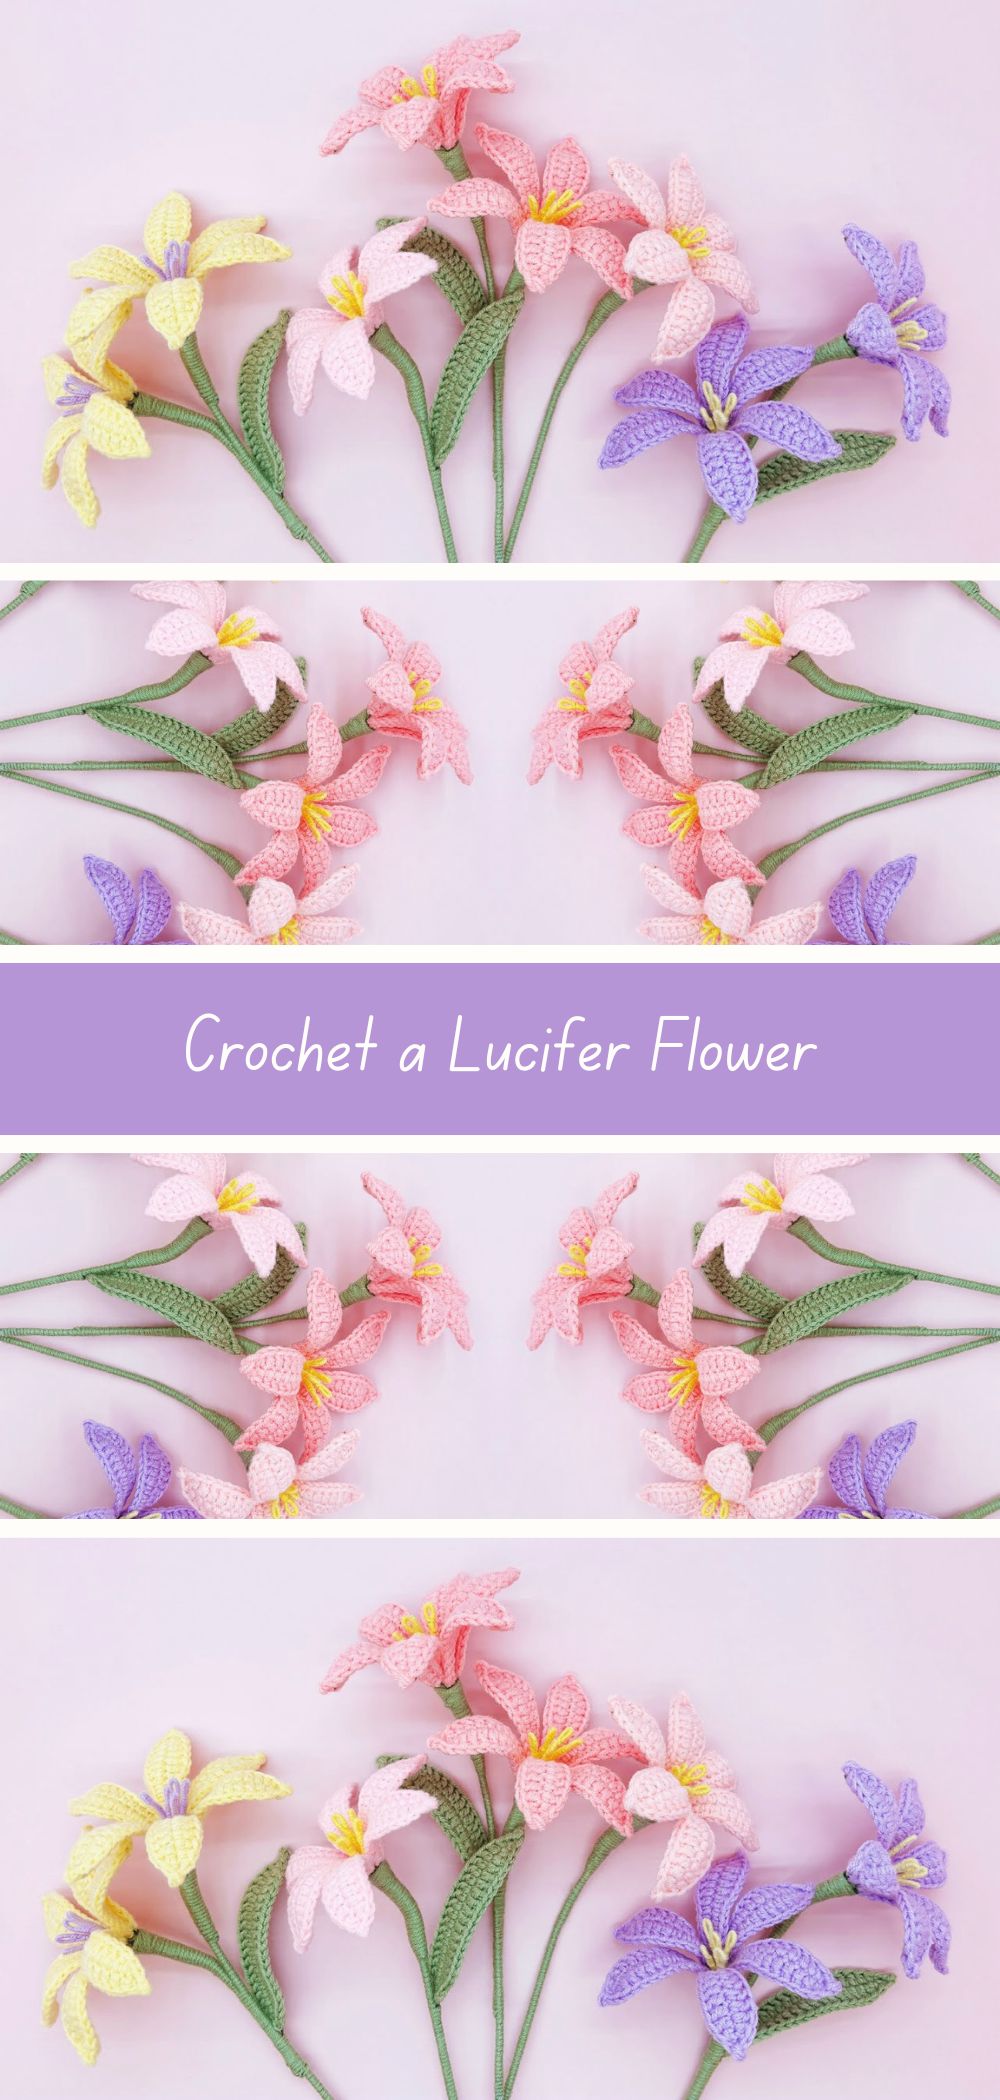 Lucifer Flower Crochet Tutorial - Step-by-step guide to crafting a beautiful crochet flower